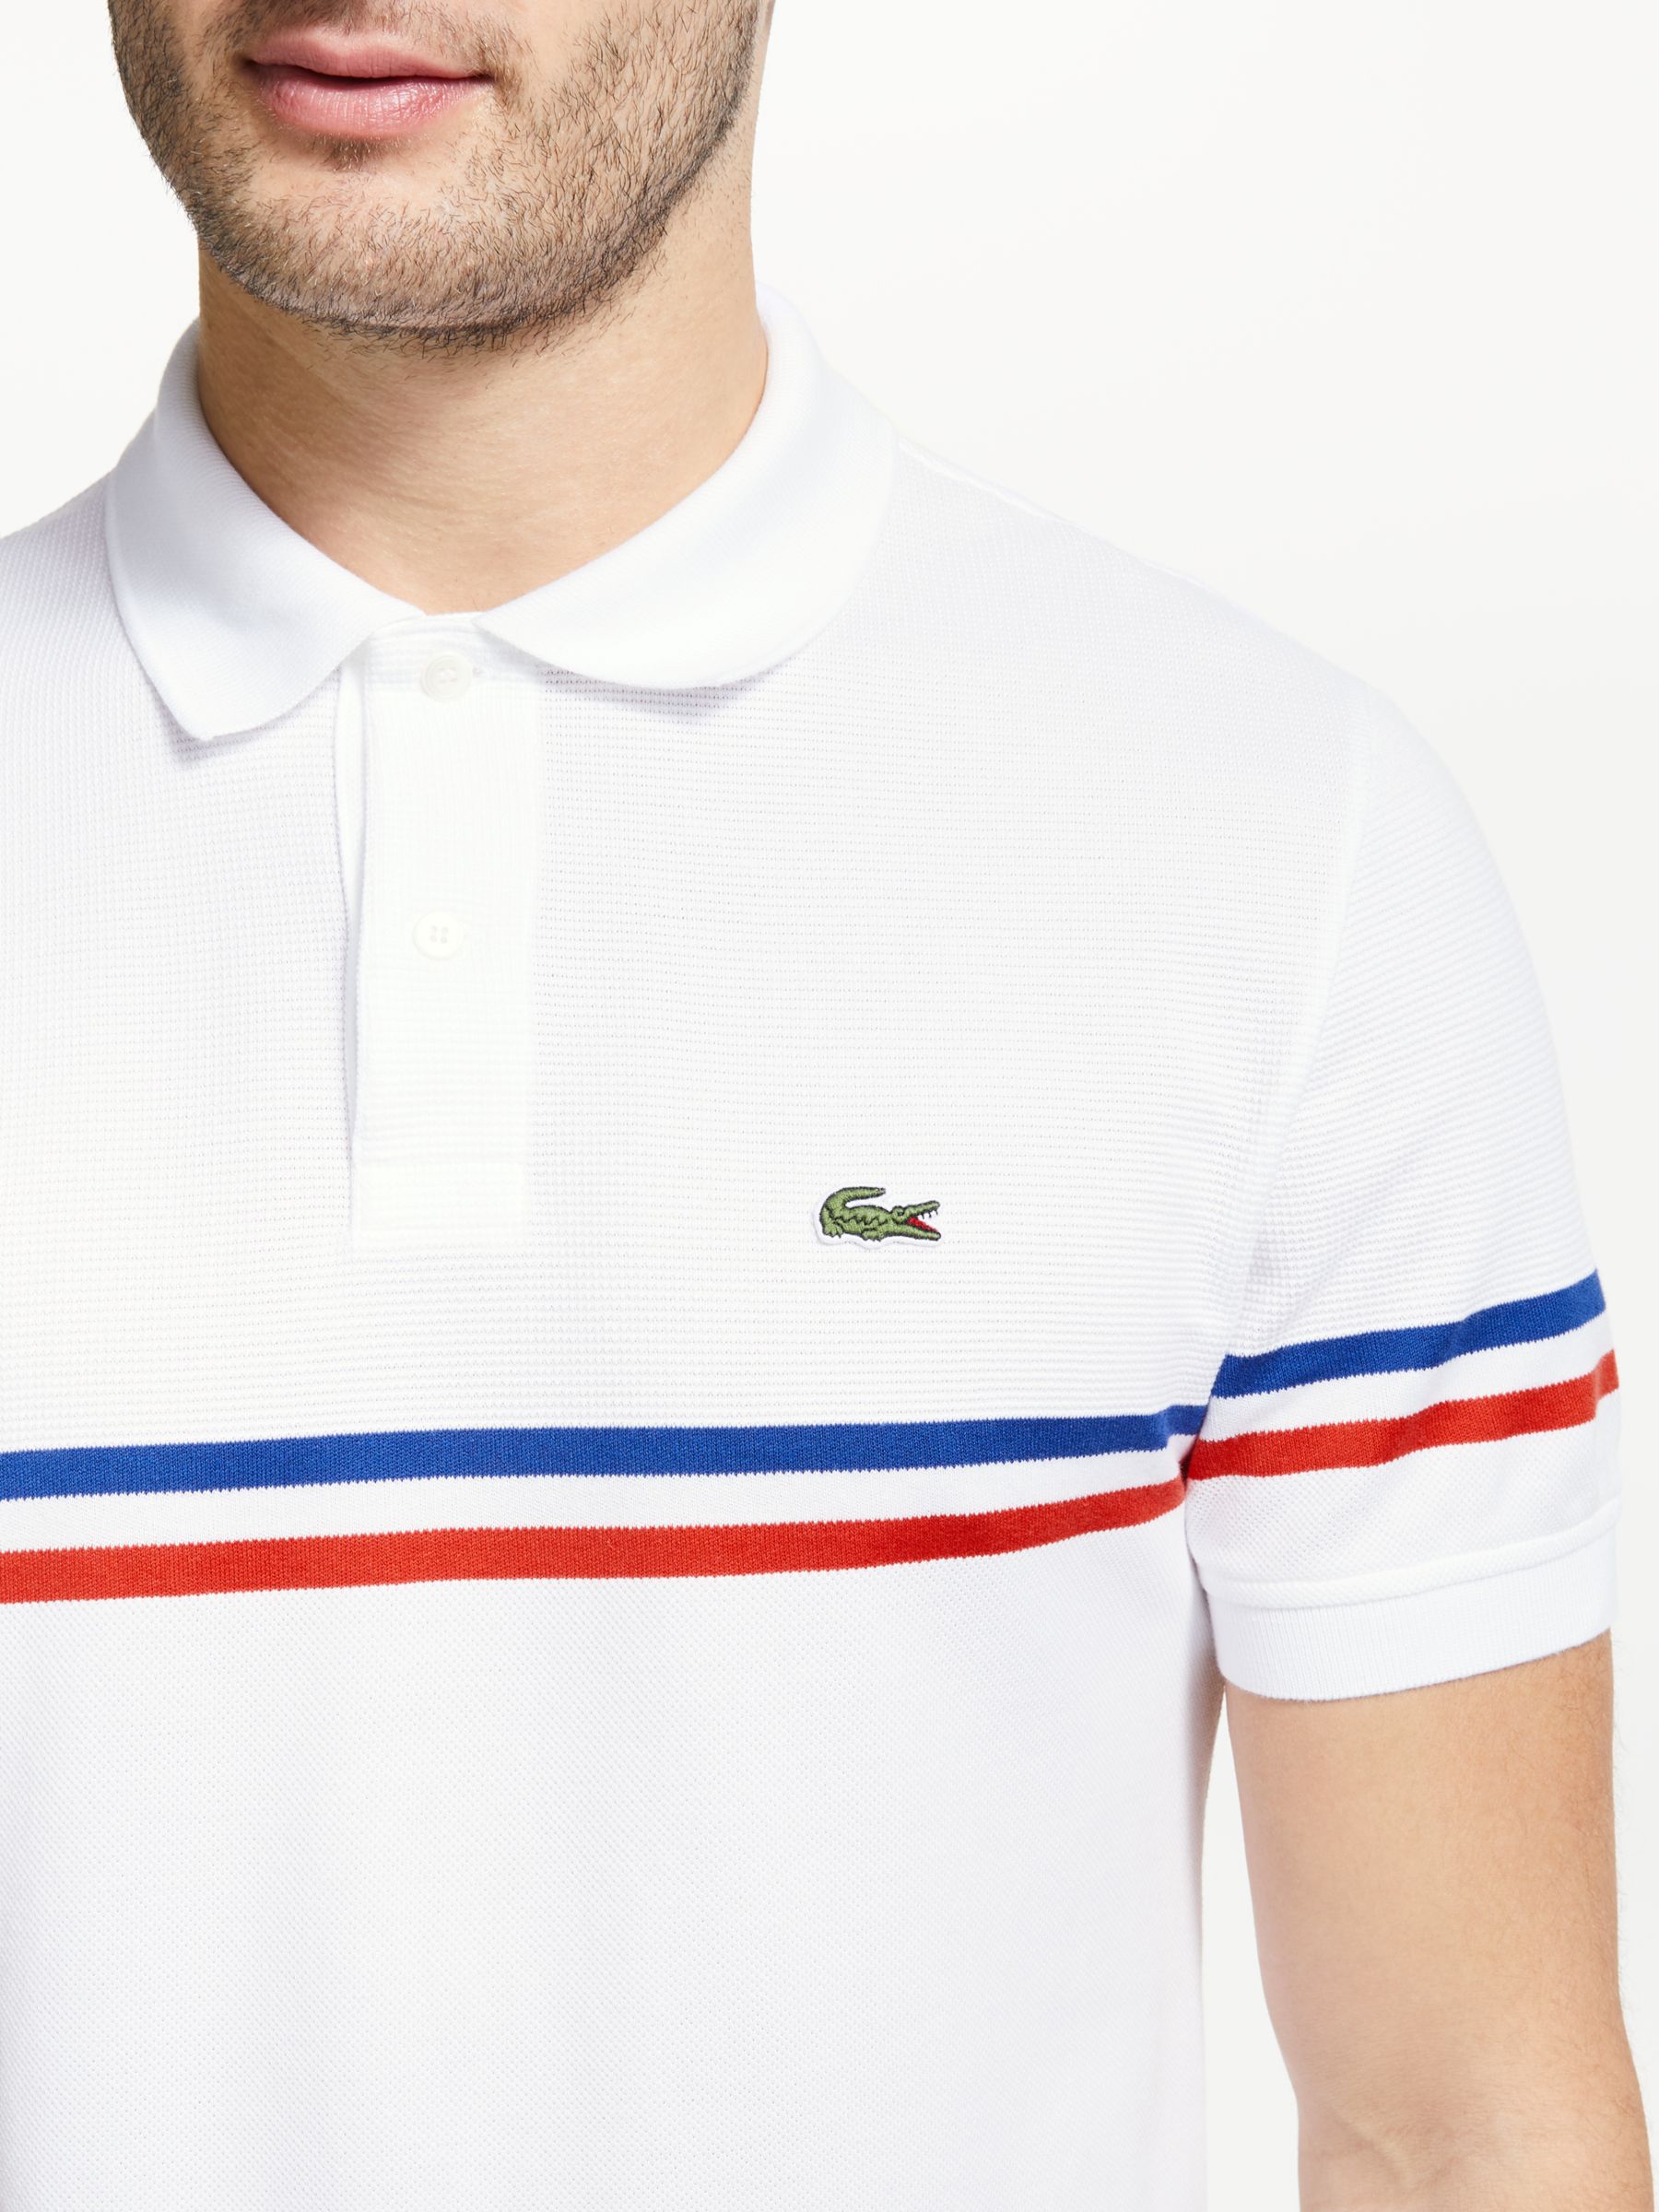 lacoste invented polo shirt